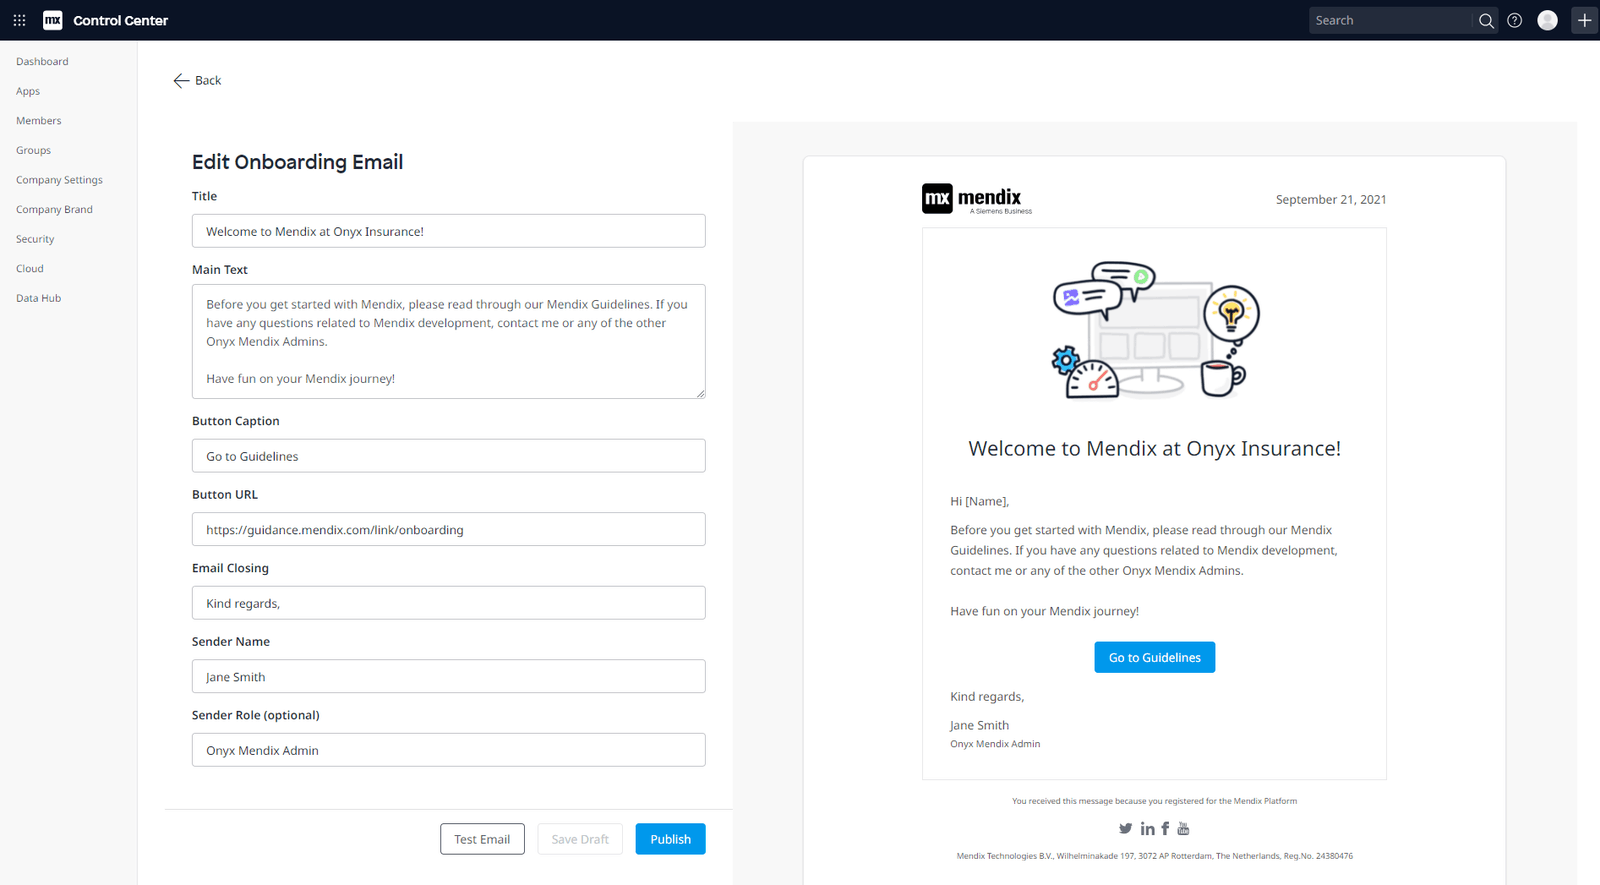 33_Company specific onboarding page email image from Mendix 9.6 release blog